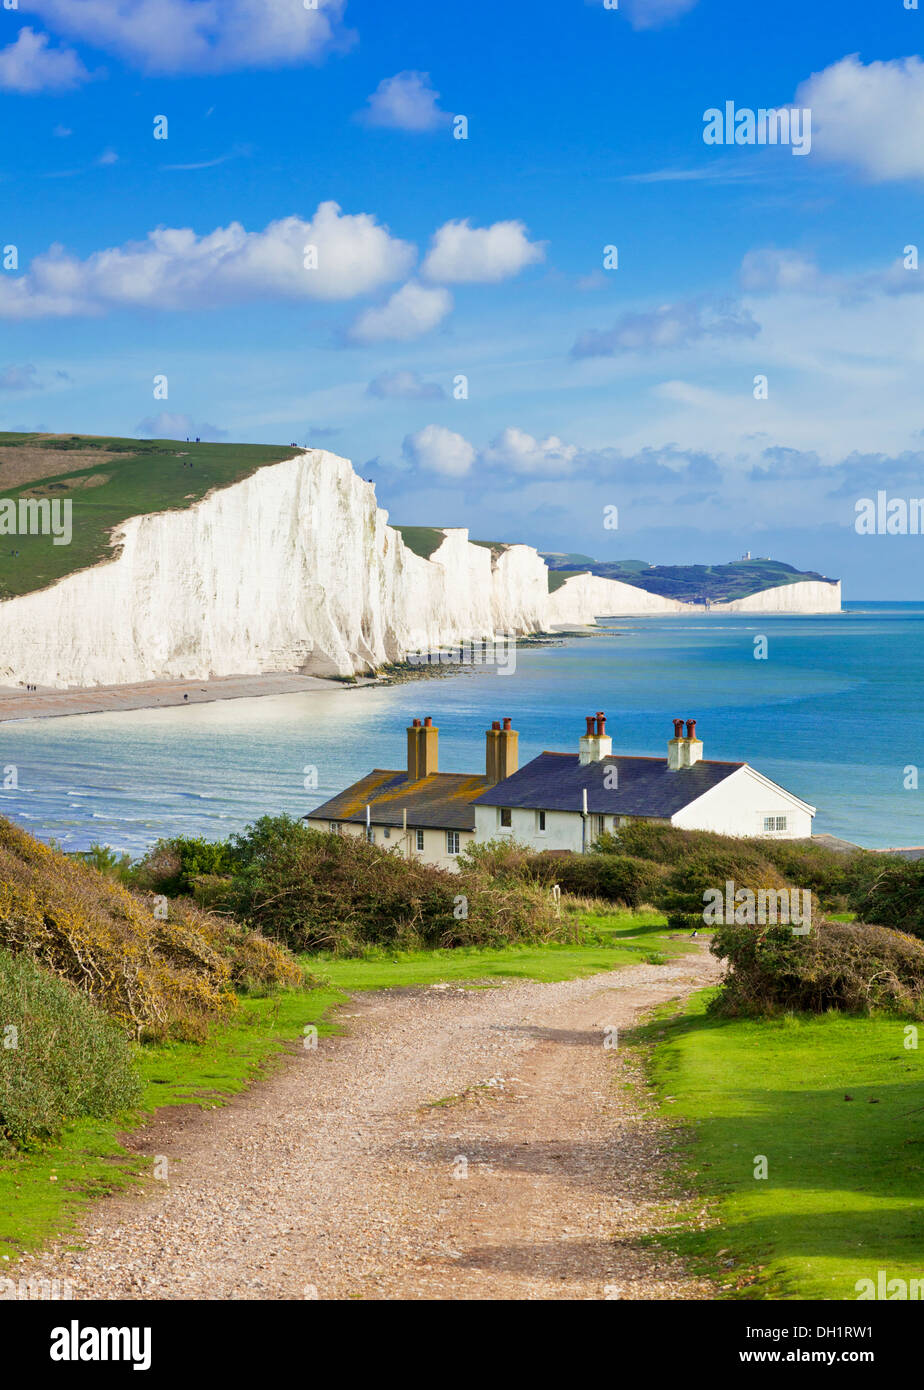 The Seven Sisters Cliffs, The Cottages Coastguard South Downs Way, South Downs National Park, East Sussex, England, UK, GB, Europa Foto Stock